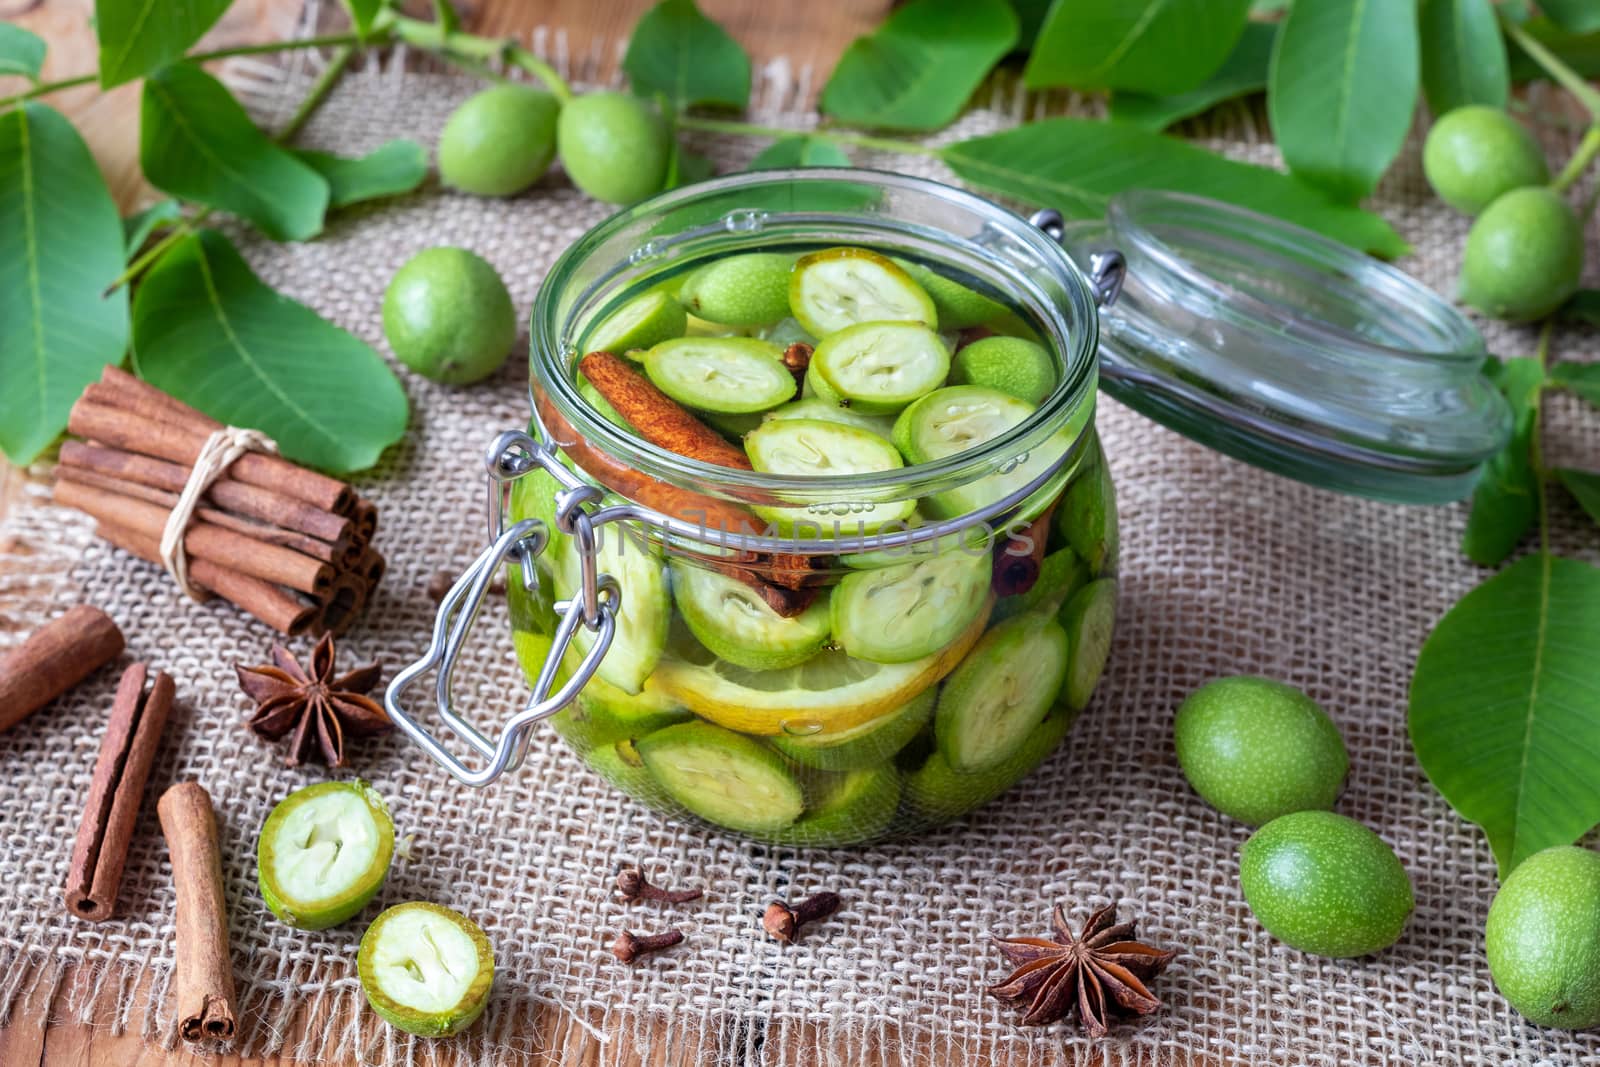 A glass jar filled with unripe walnuts, alcohol and spices, to prepare homemade tincture